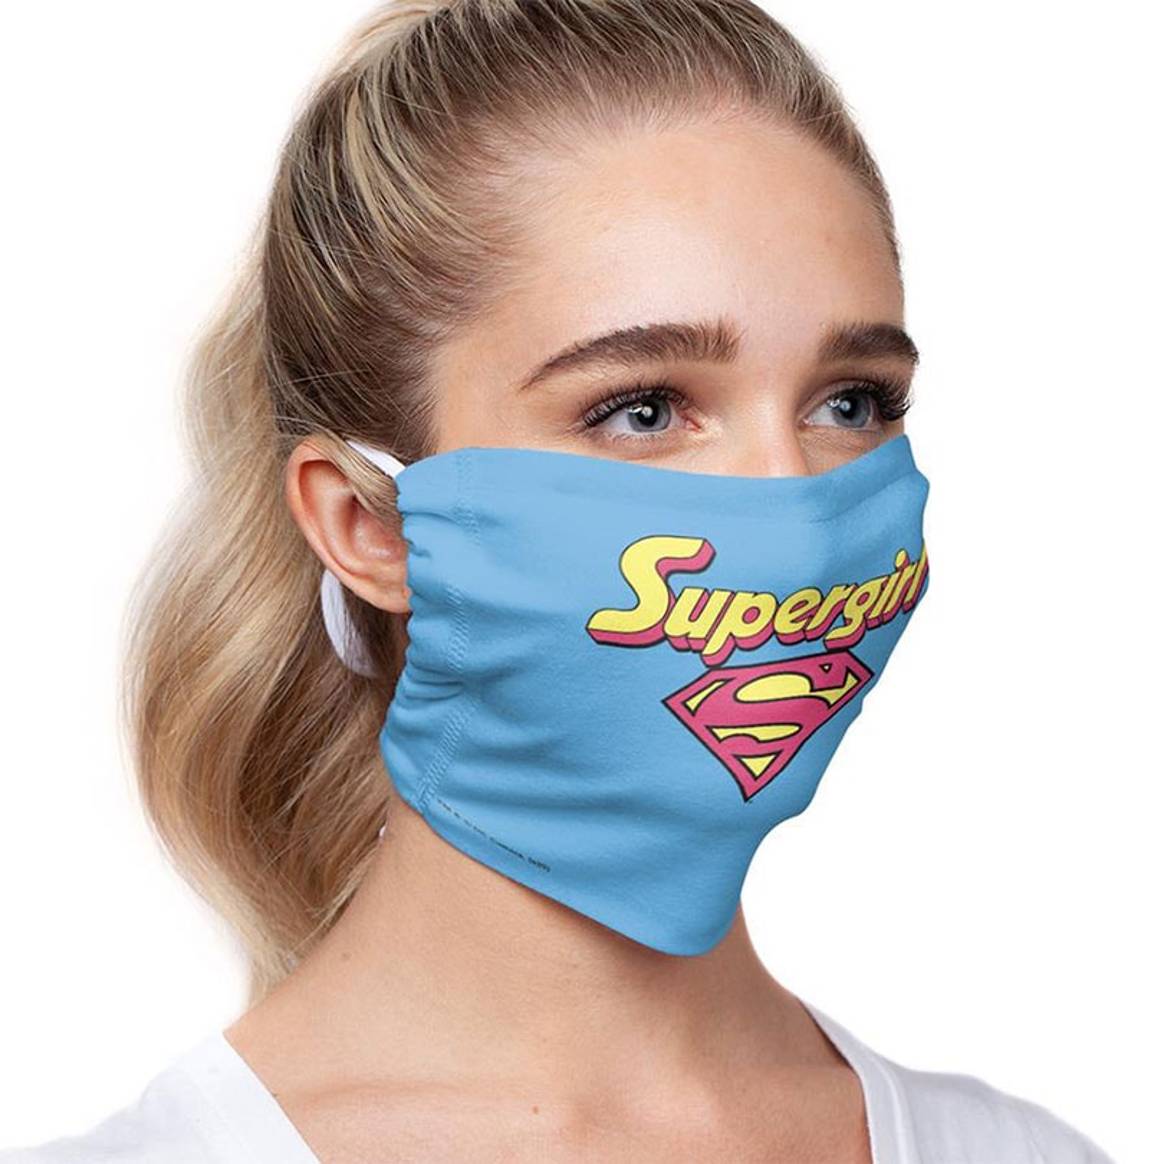 Fashion brands turn to face masks for charity drives